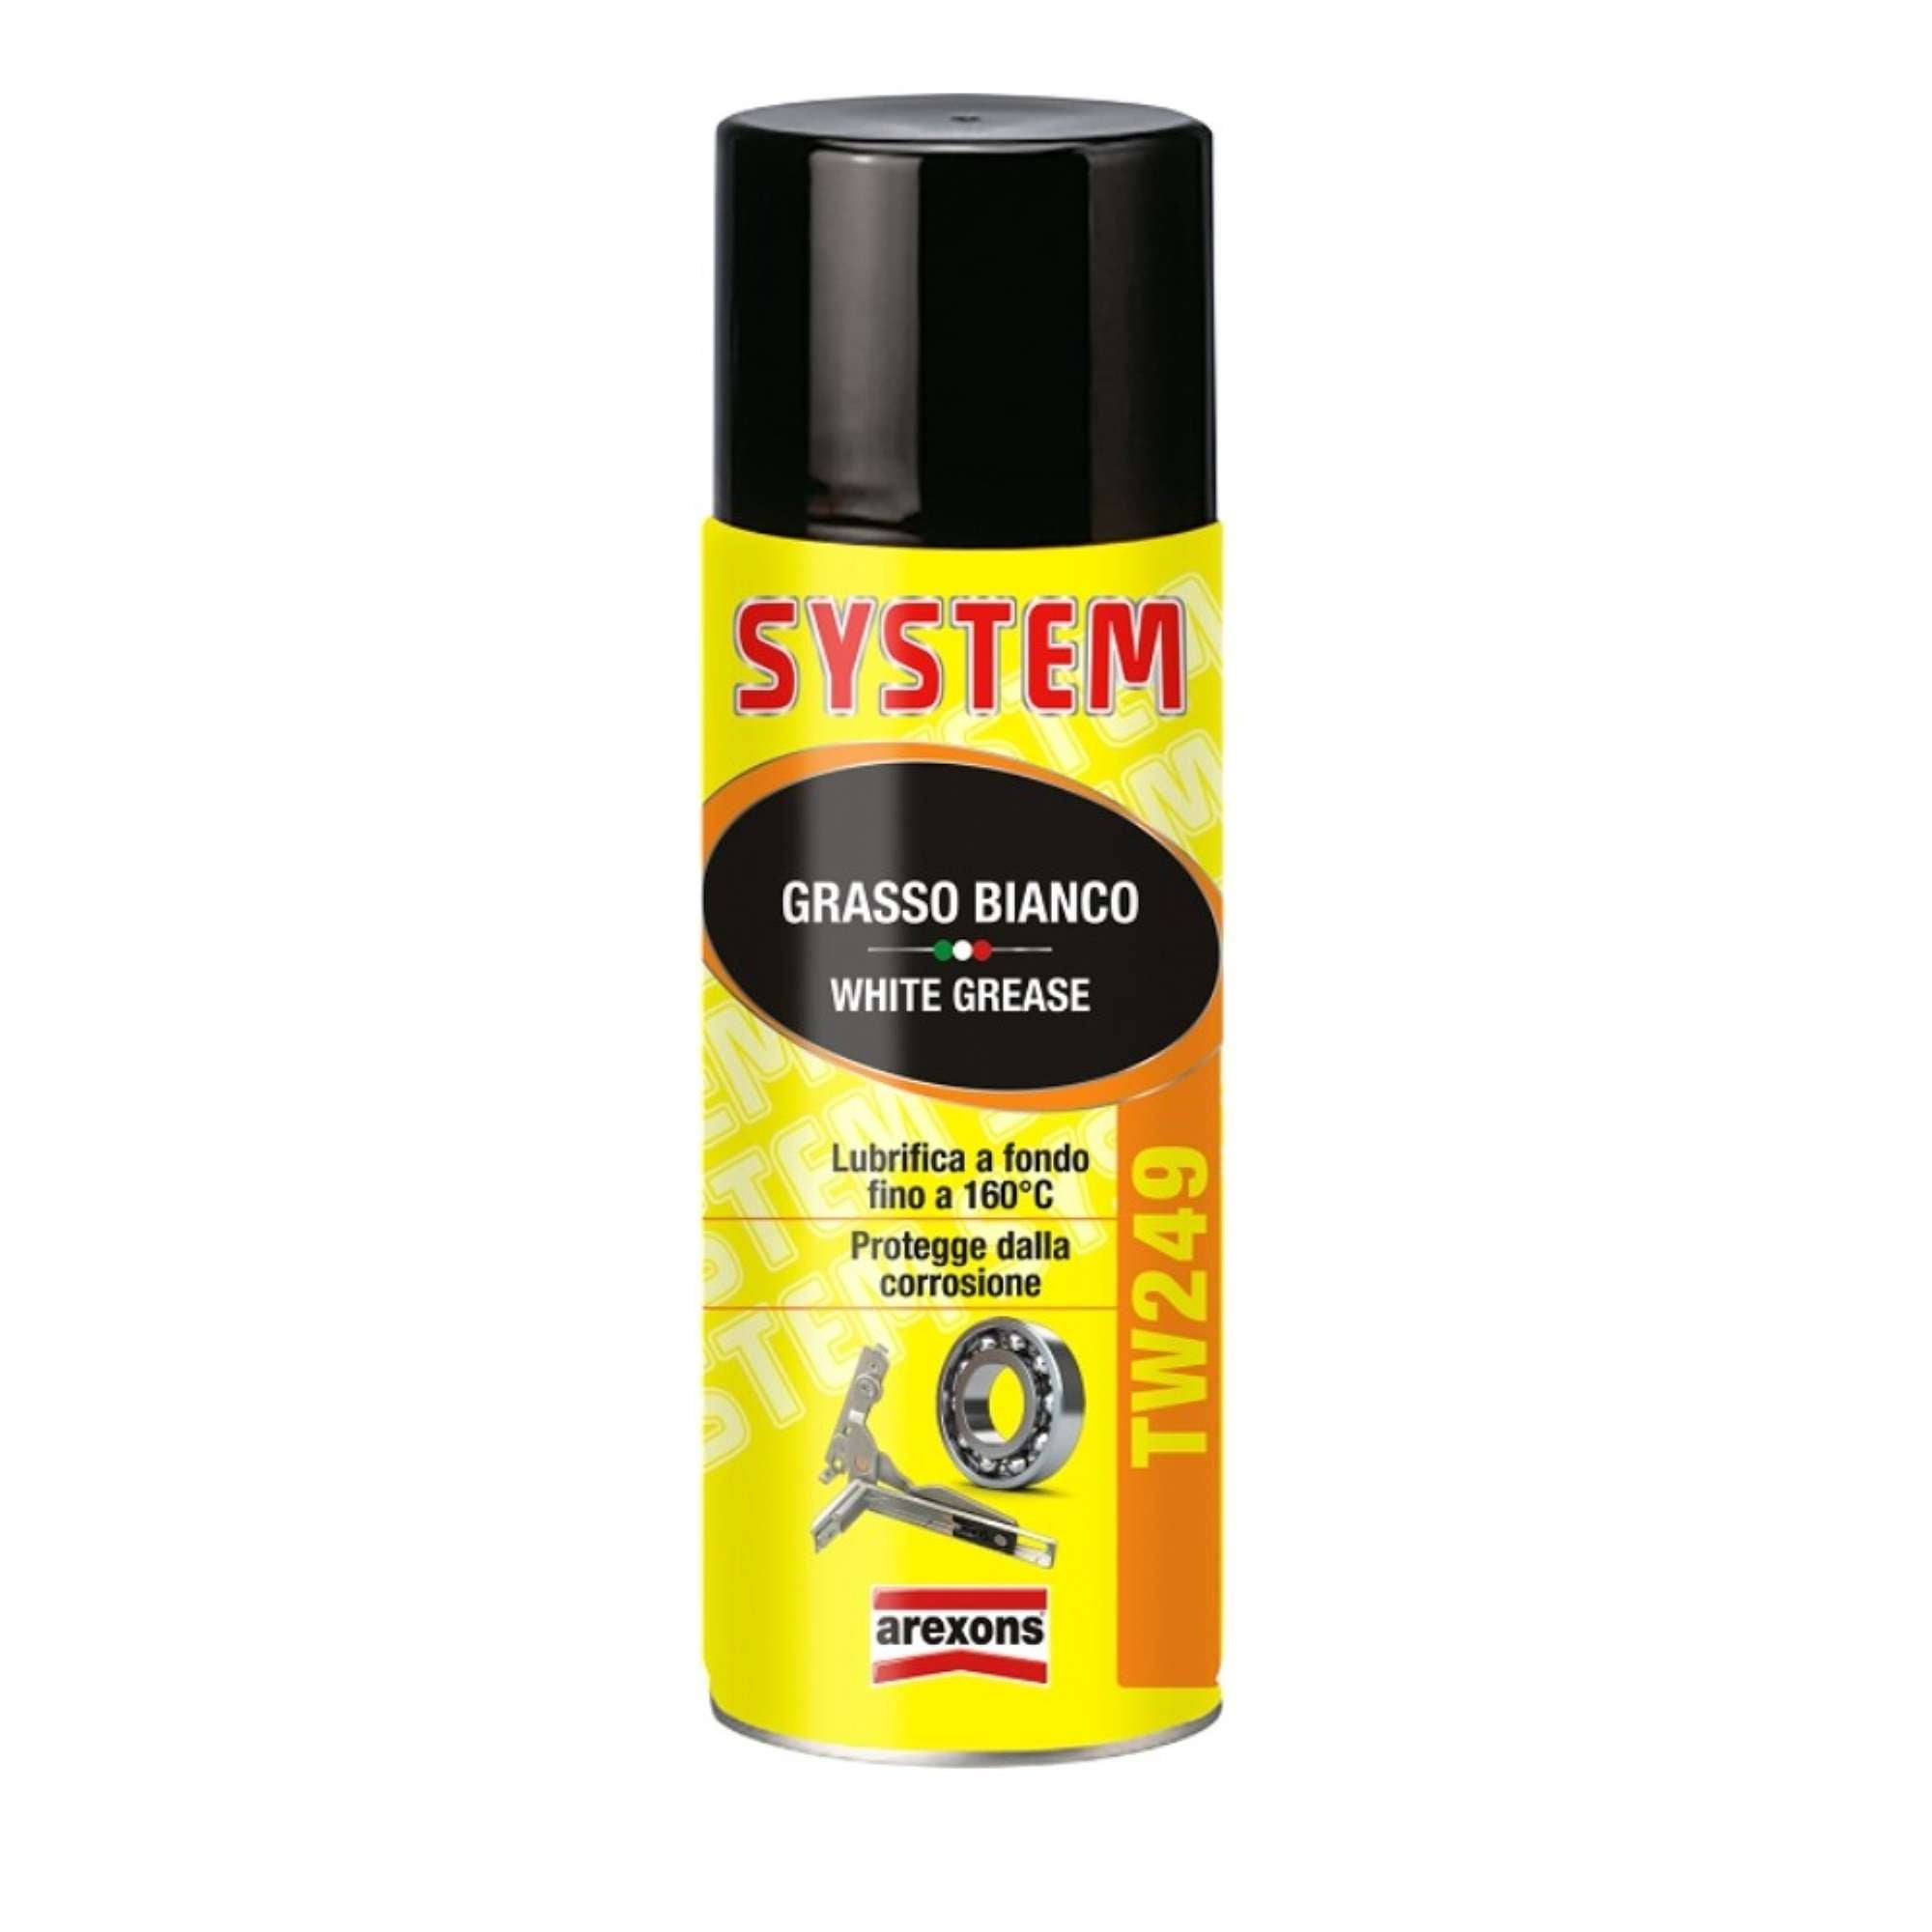 System TW249 White Grease 400ml - Arexons 4249